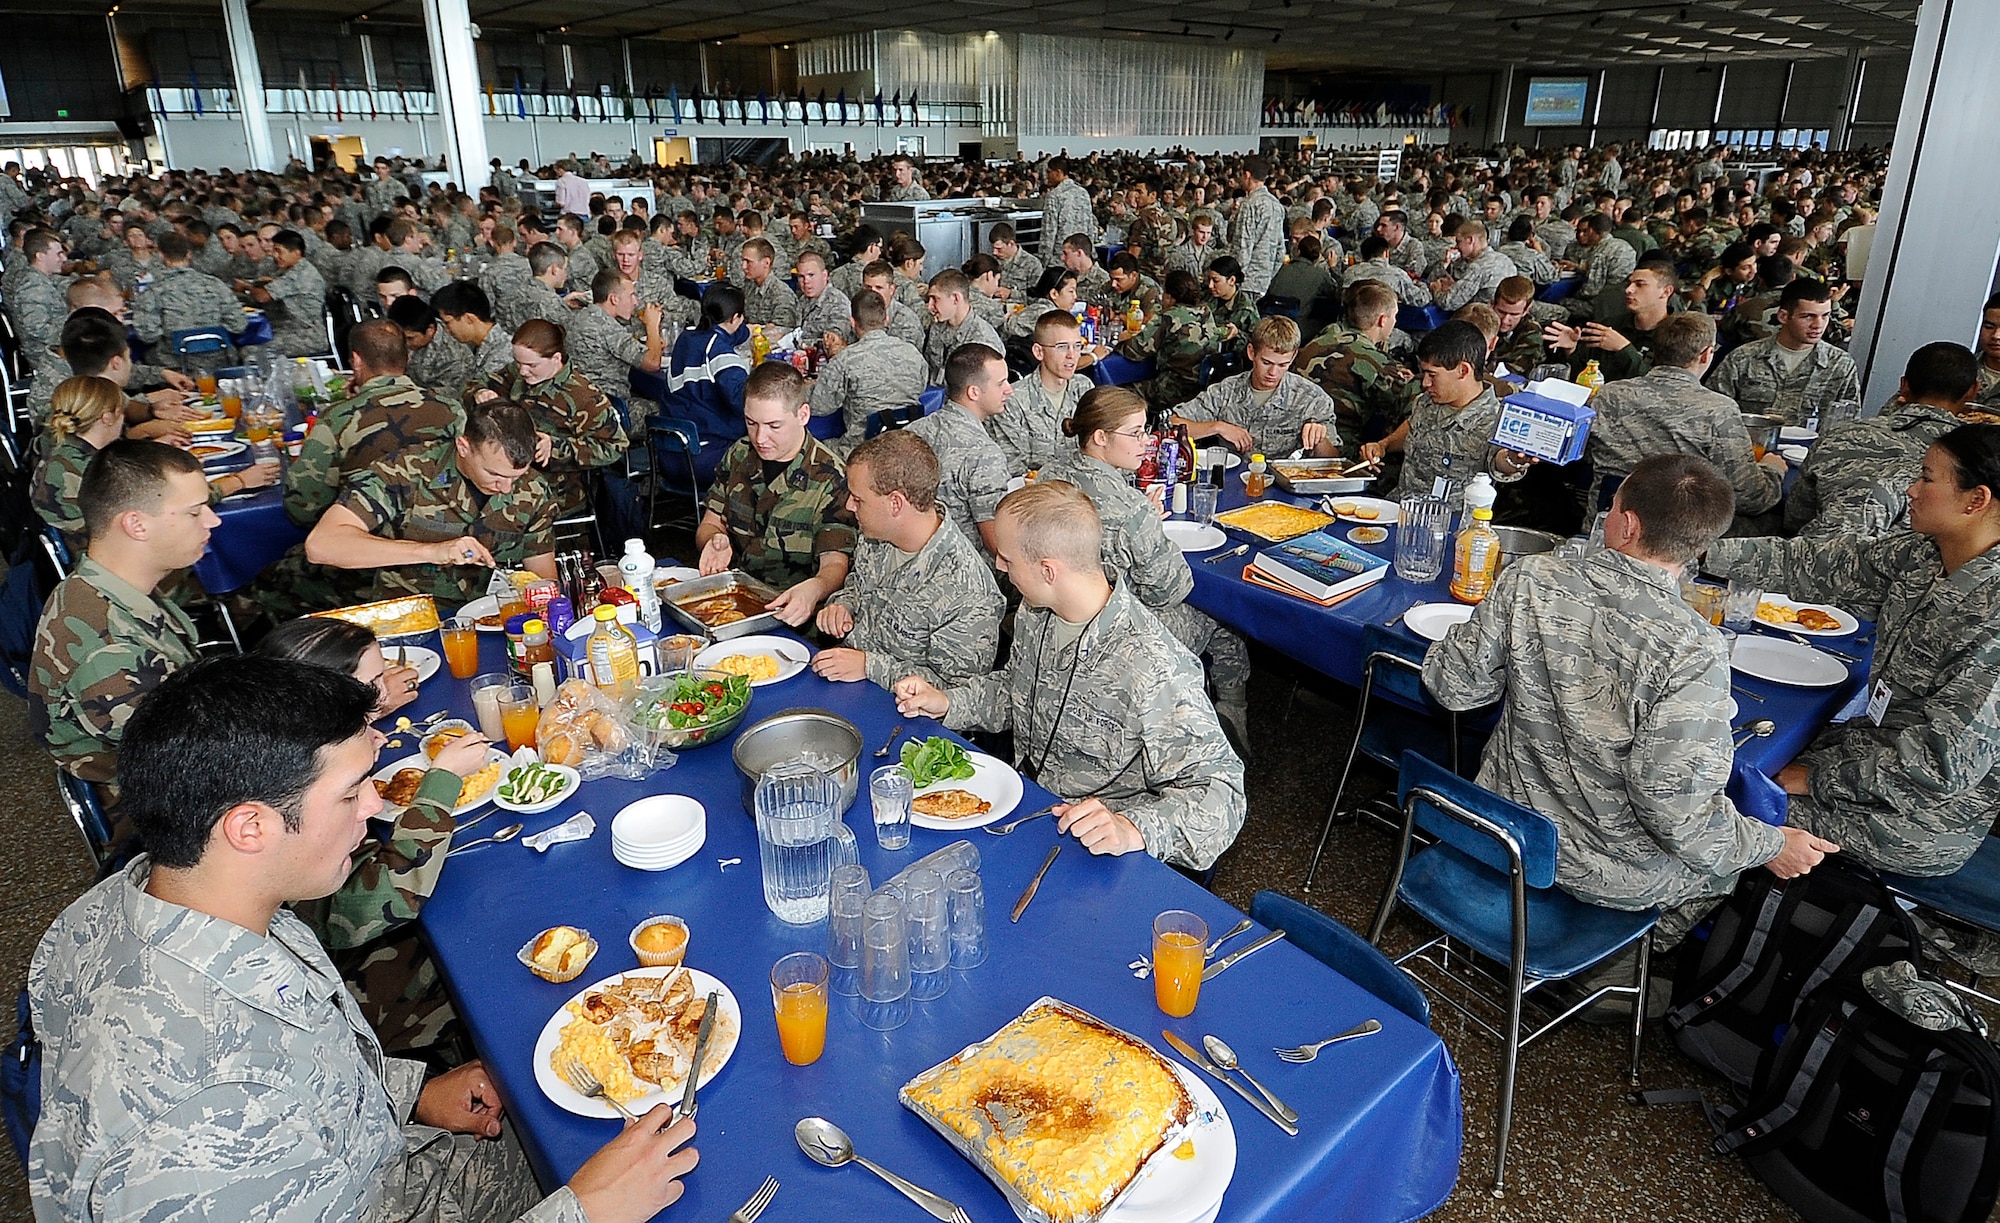 Cadets eat lunch at Mitchell Hall Aug. 10, 2010, during the first full week of the 2010-2011 school year at the Air Force Academy in Colorado Springs, Colo. The staff at Mitchell Hall serves 4,000 meals for the Cadet Wing three times per day. (U.S. Air Force photo/Rachel Boettcher)